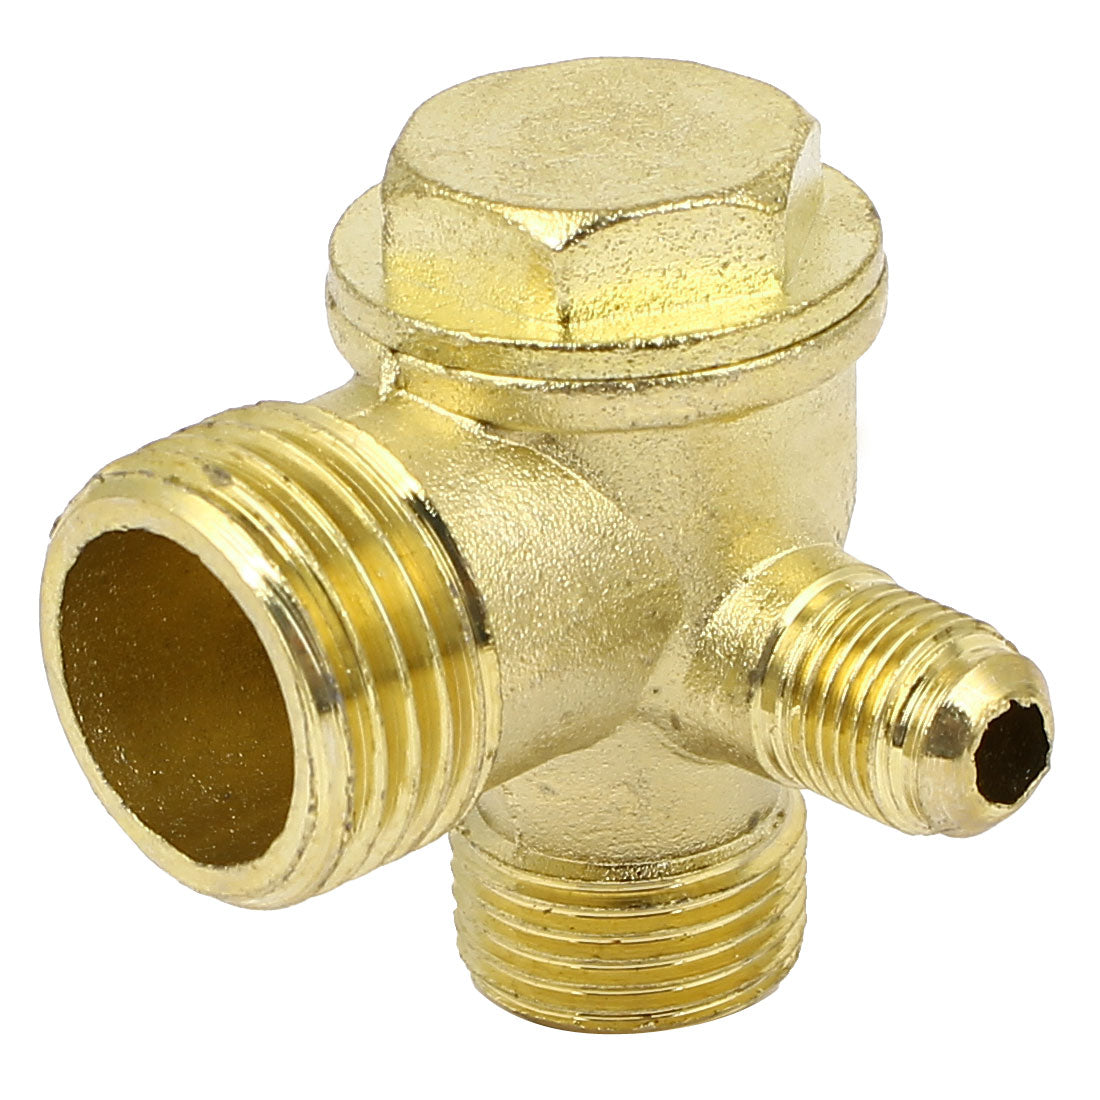 uxcell Uxcell 3/8BSP x 1/2BSP x 1/8BSP Male Threaded Air Compressor Check Valve Gold Tone